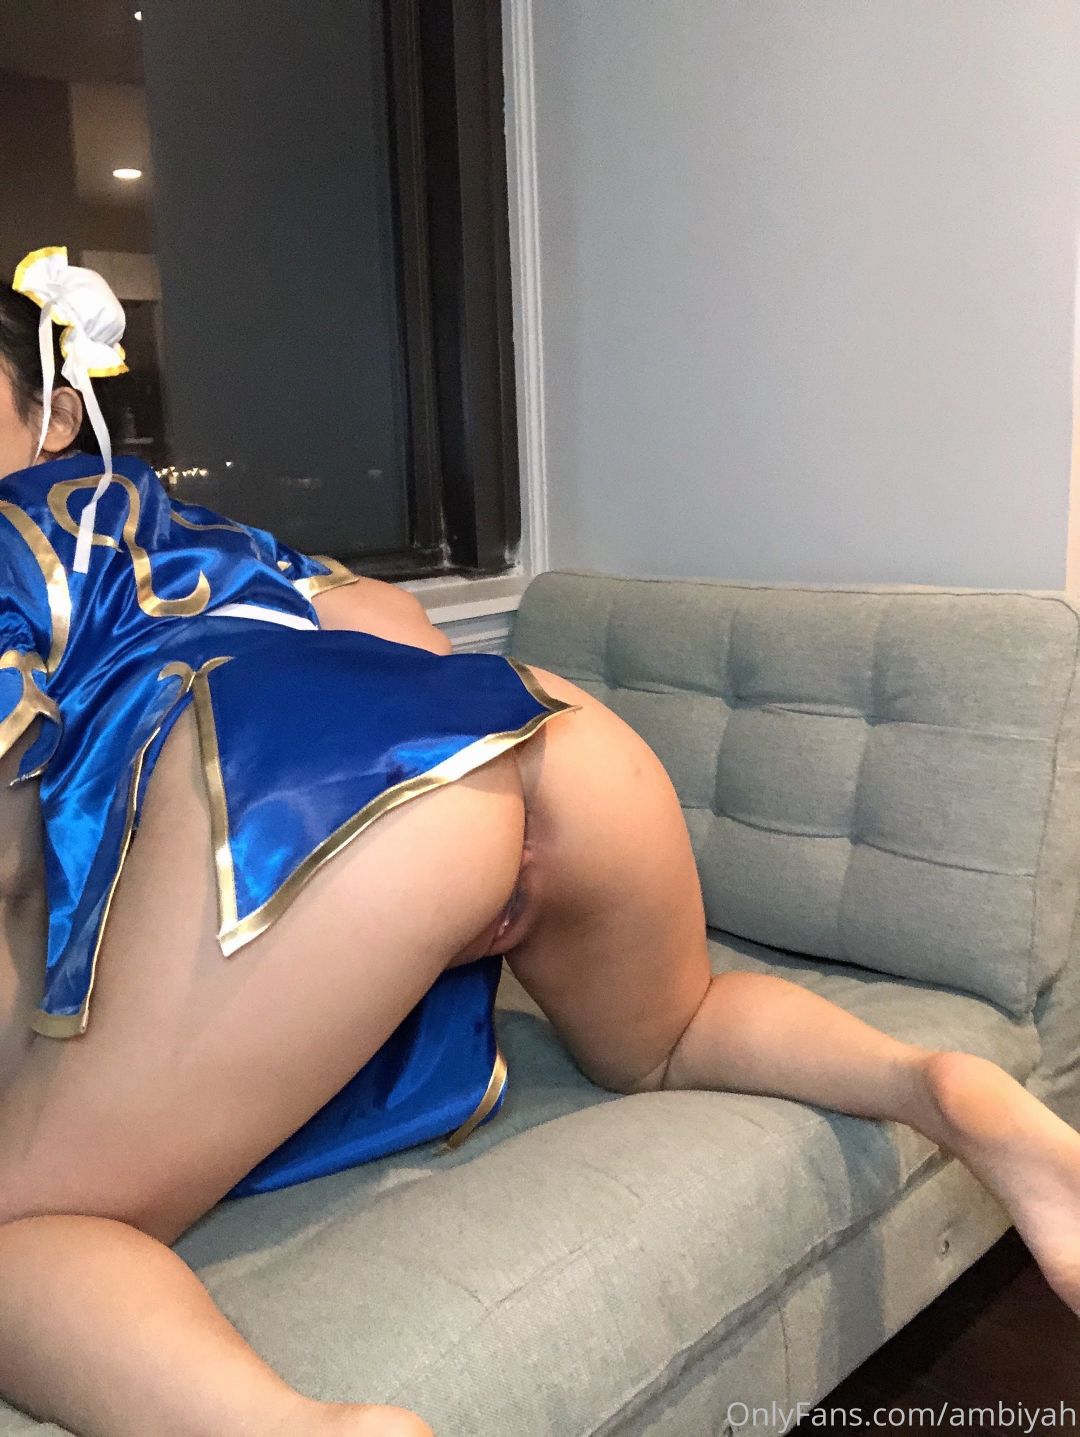 AsianOnlyfans 72 013 814 20220225